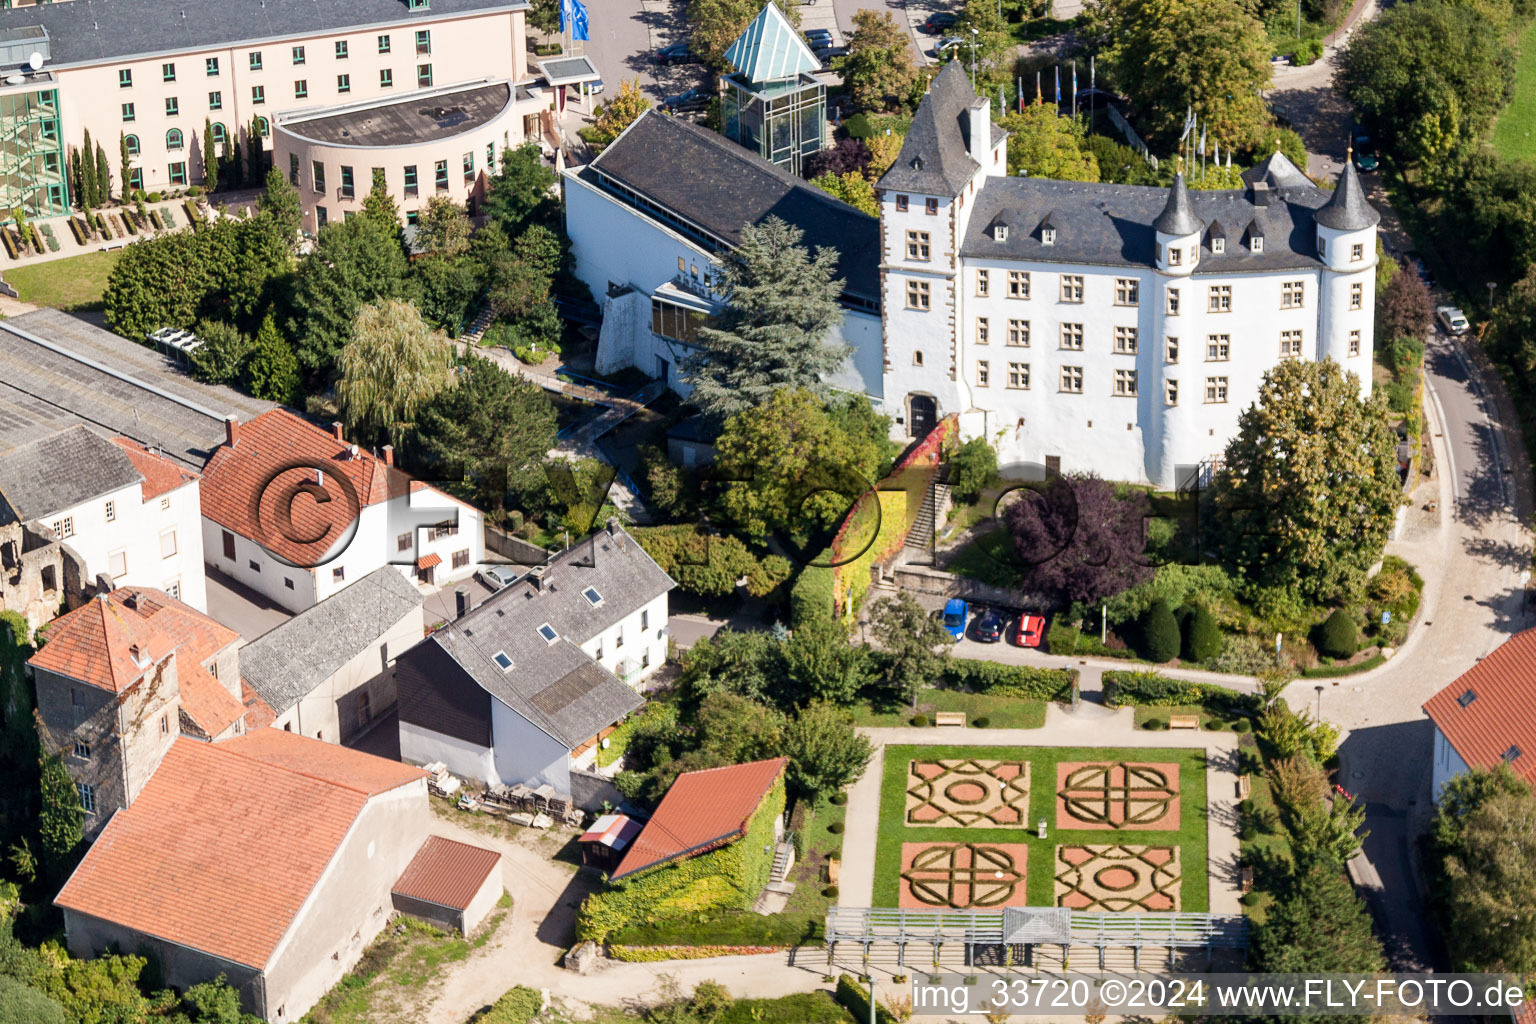 Aerial photograpy of Complex of the hotel building Victor's Residenz-Hotel Schloss Berg and Niederburg Nennig in Perl in the state Saarland, Germany